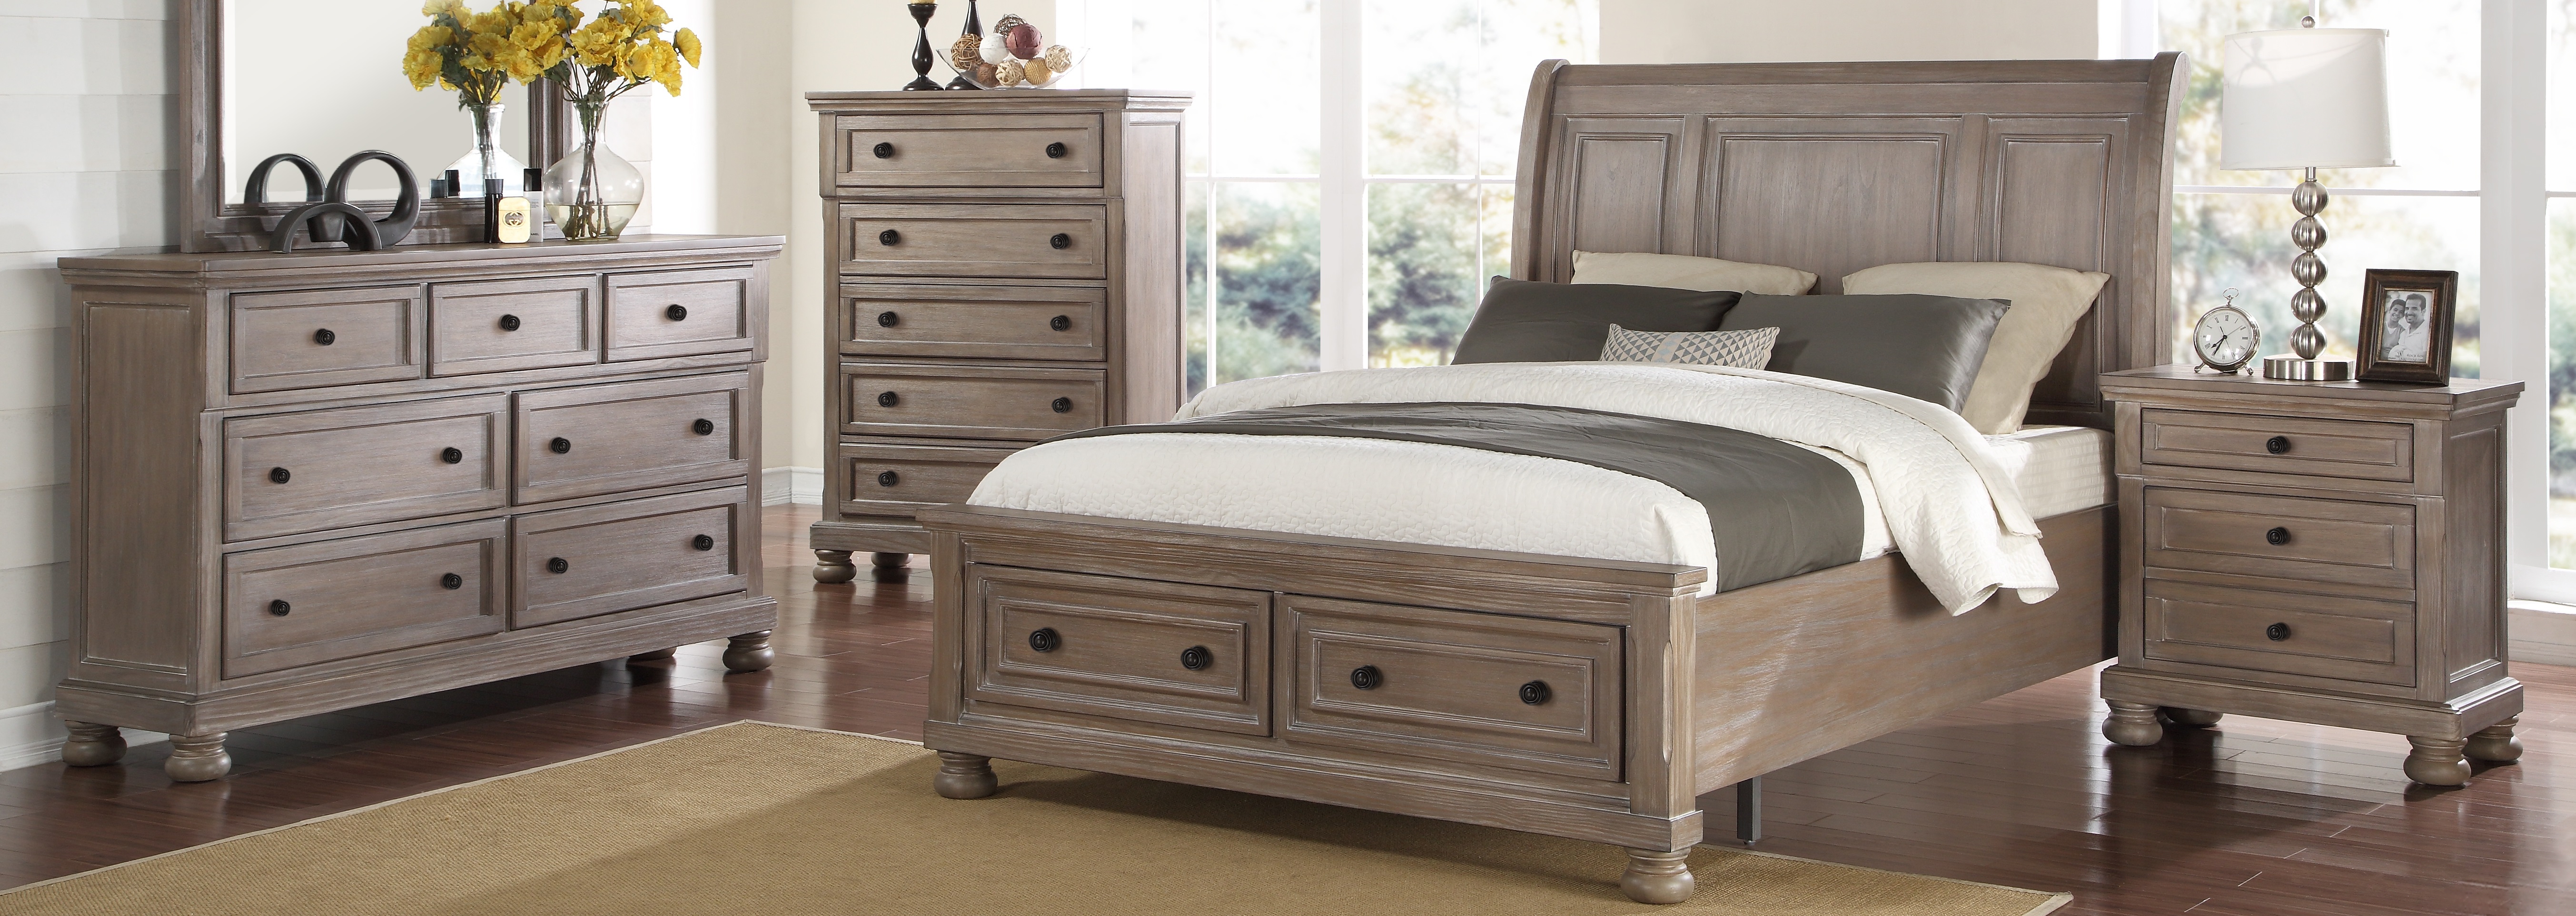 Bedrooms American Furniture Outlets